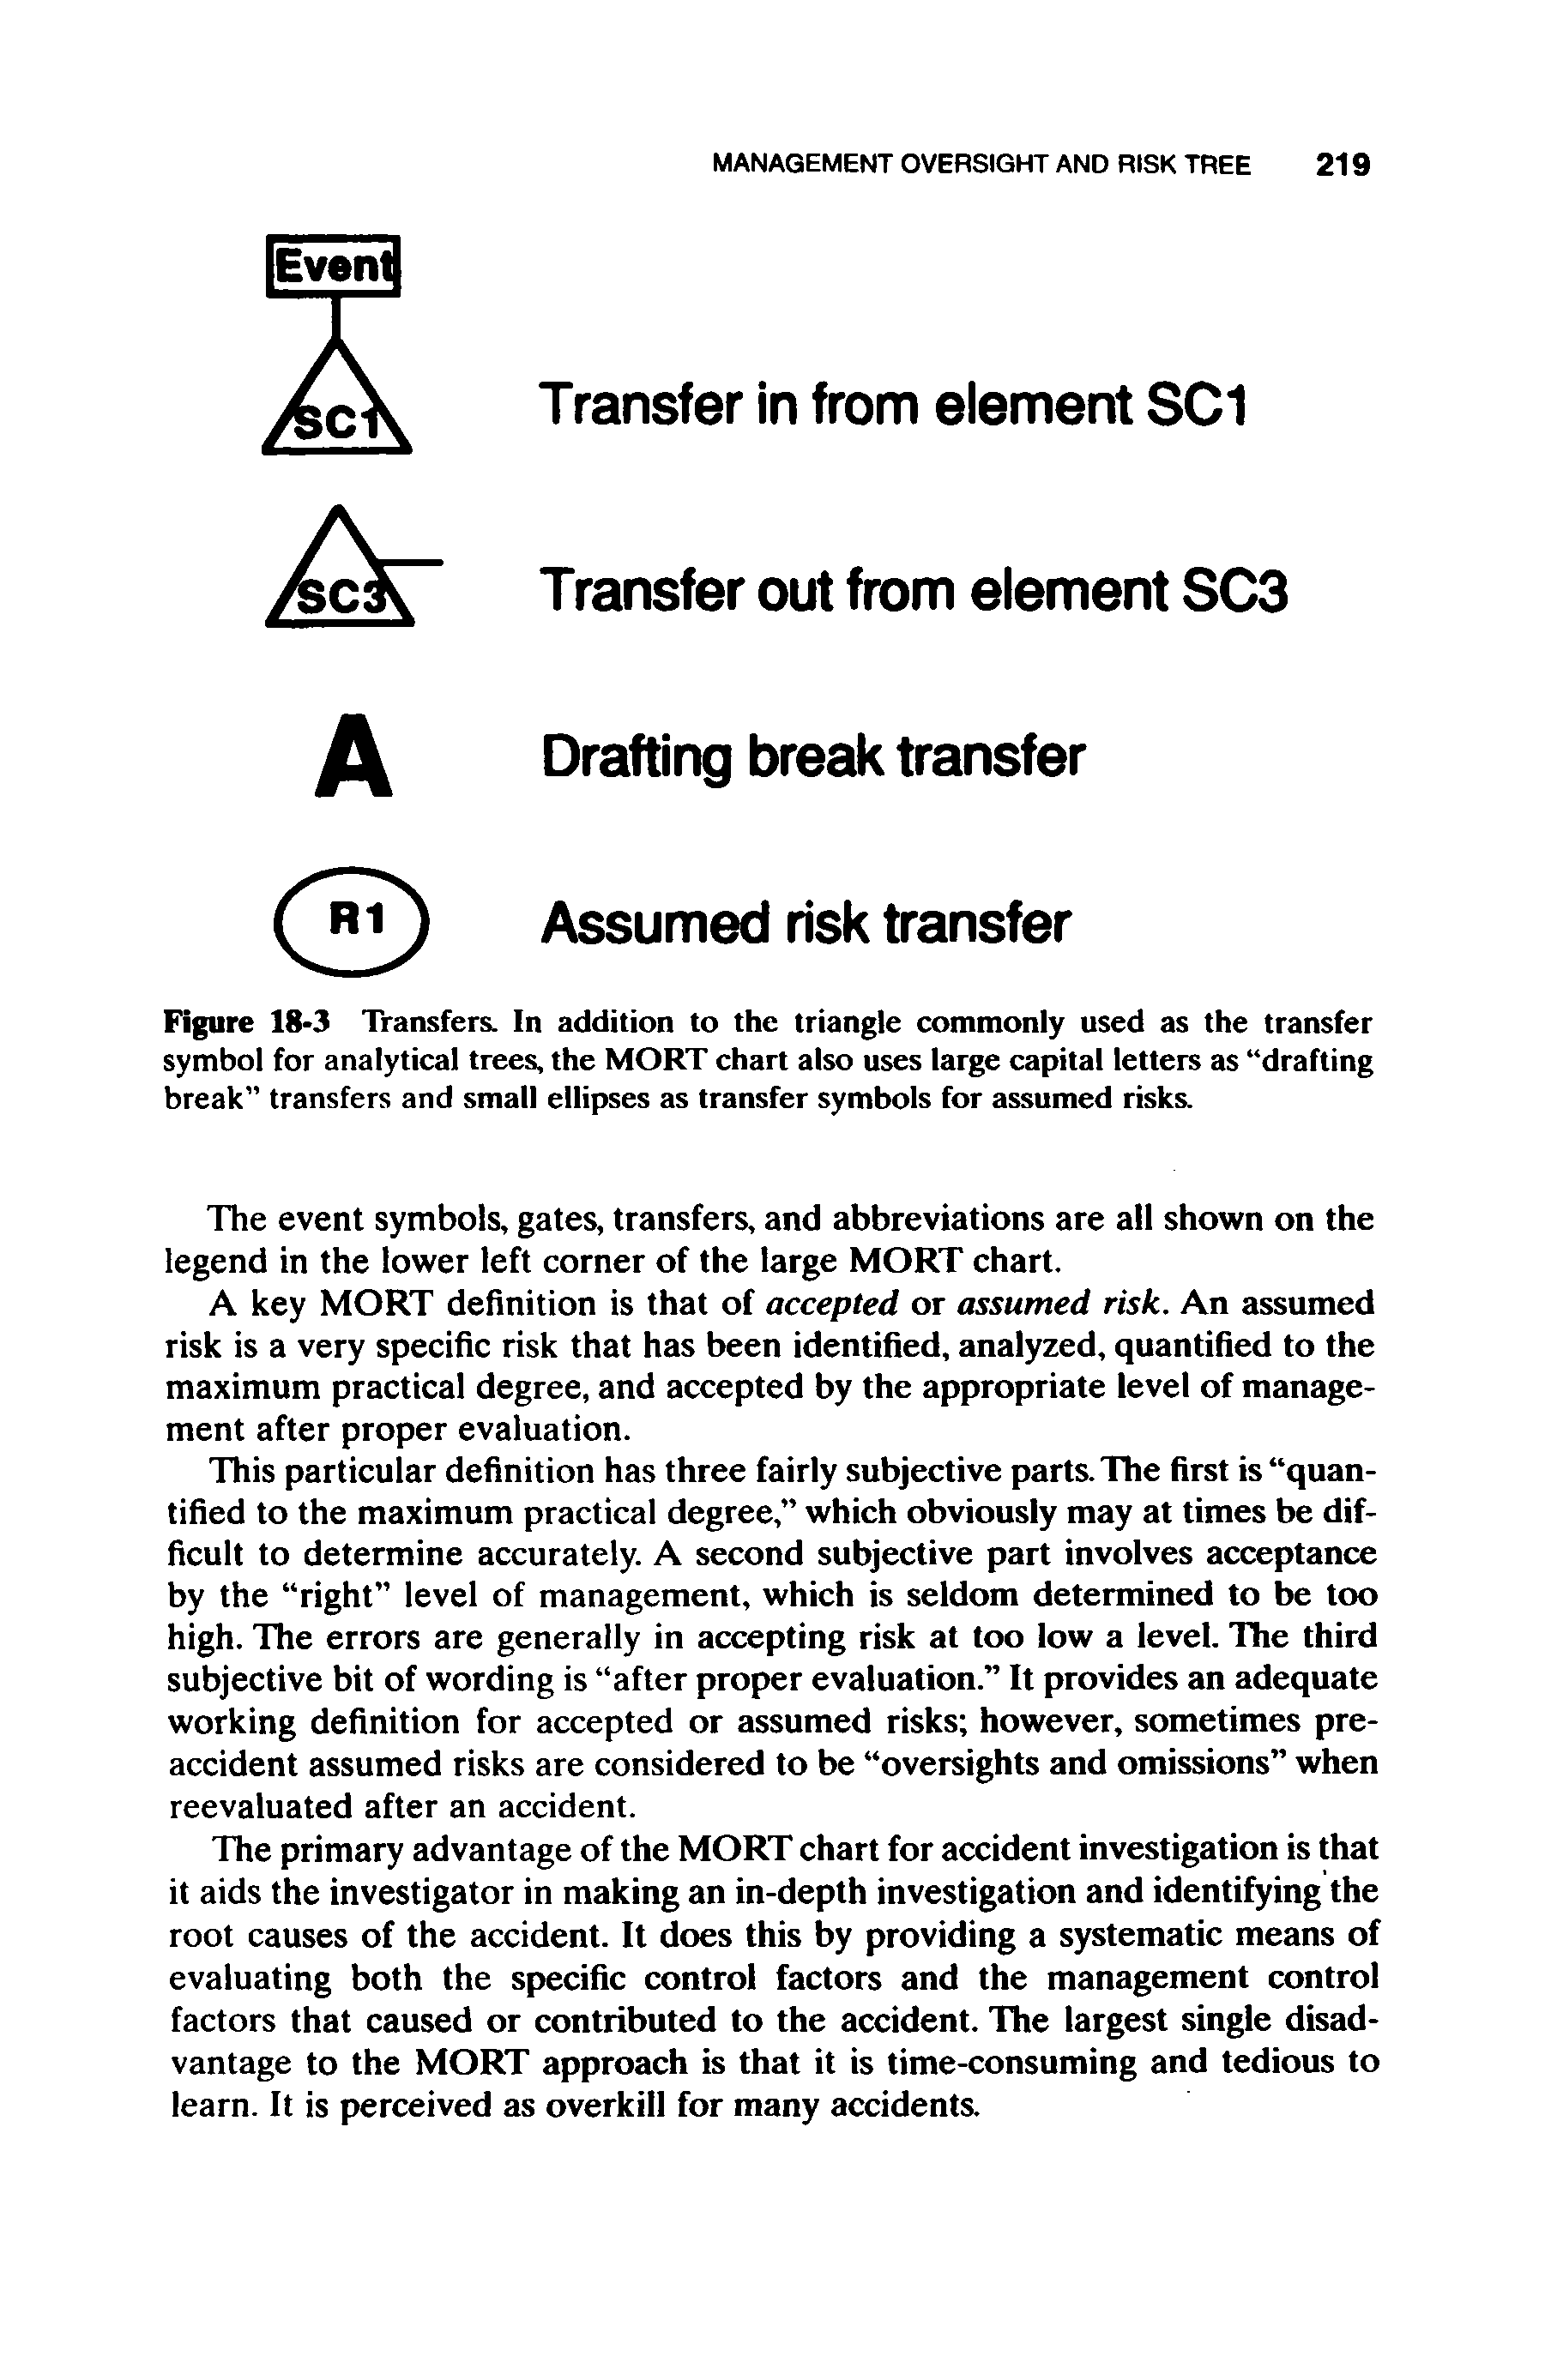 Figure 18-3 Transfers In addition to the triangle commonly used as the transfer symbol for analytical trees, the MORT chart also uses large capital letters as drafting break transfers and small ellipses as transfer symbols for assumed risks.